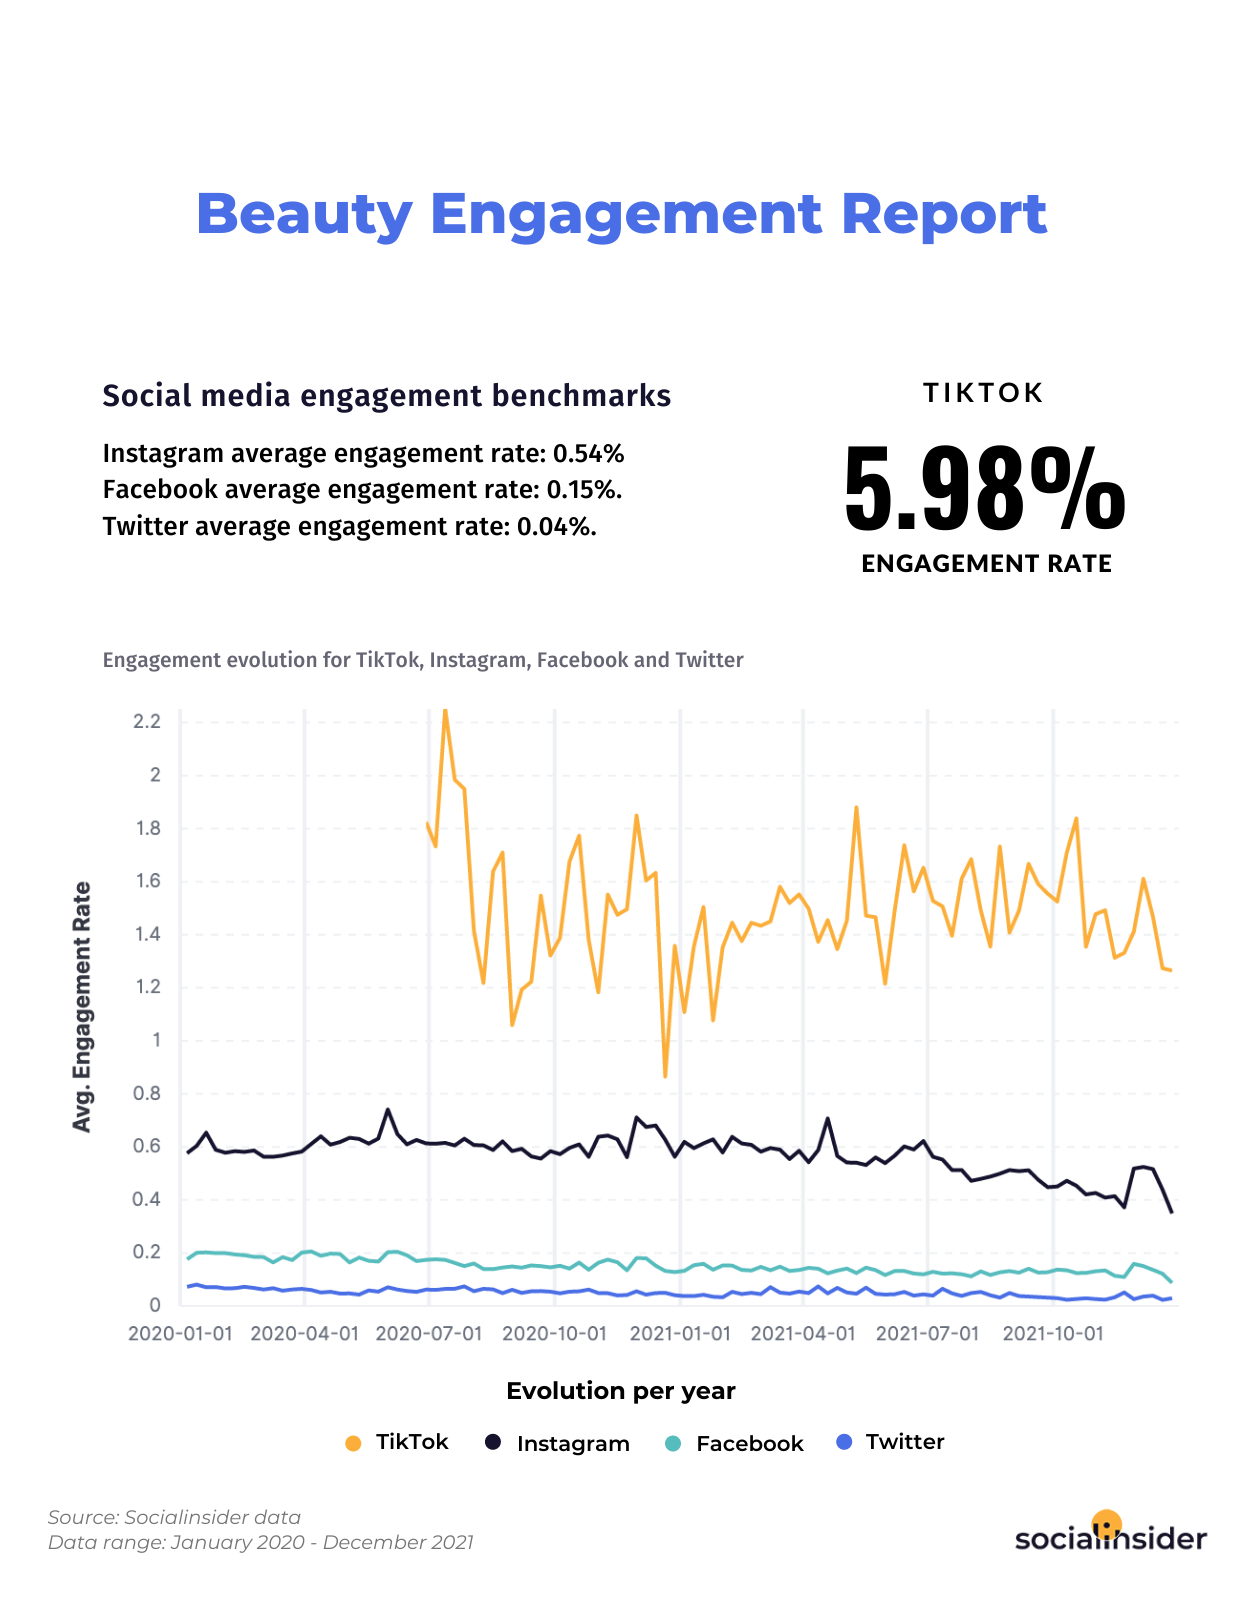 Average engagement rates for the beauty industry in 2022.